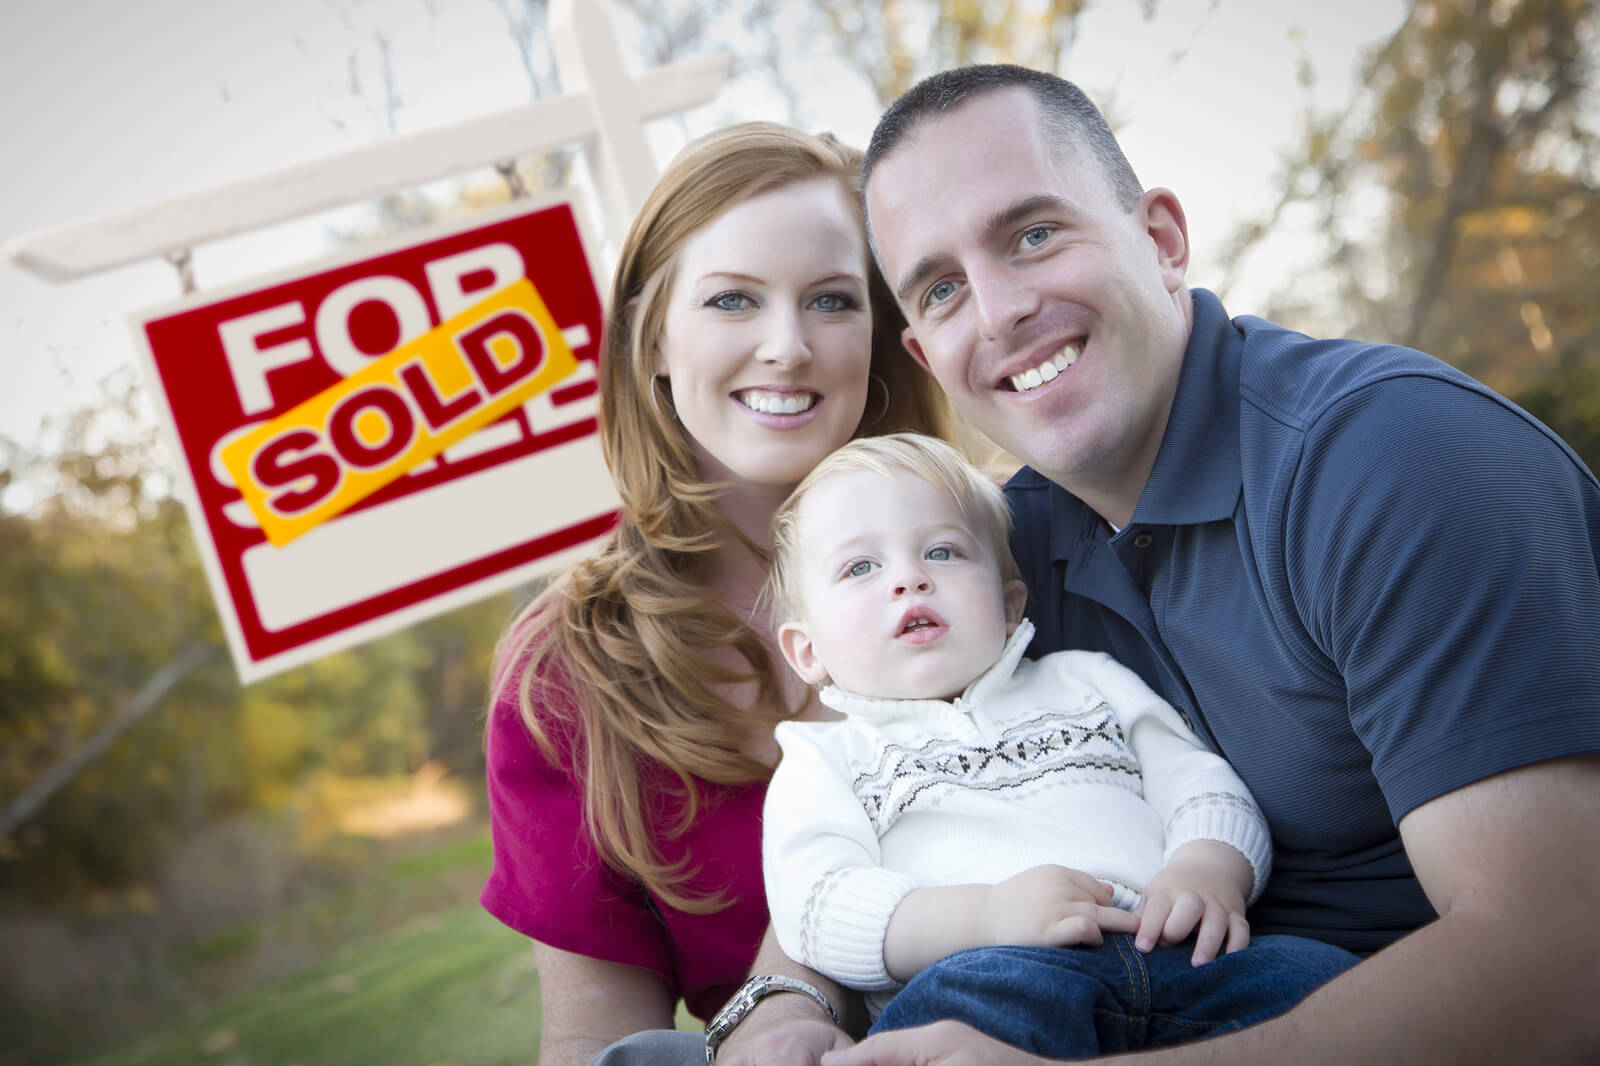 young couple in front of a sold real estate sign